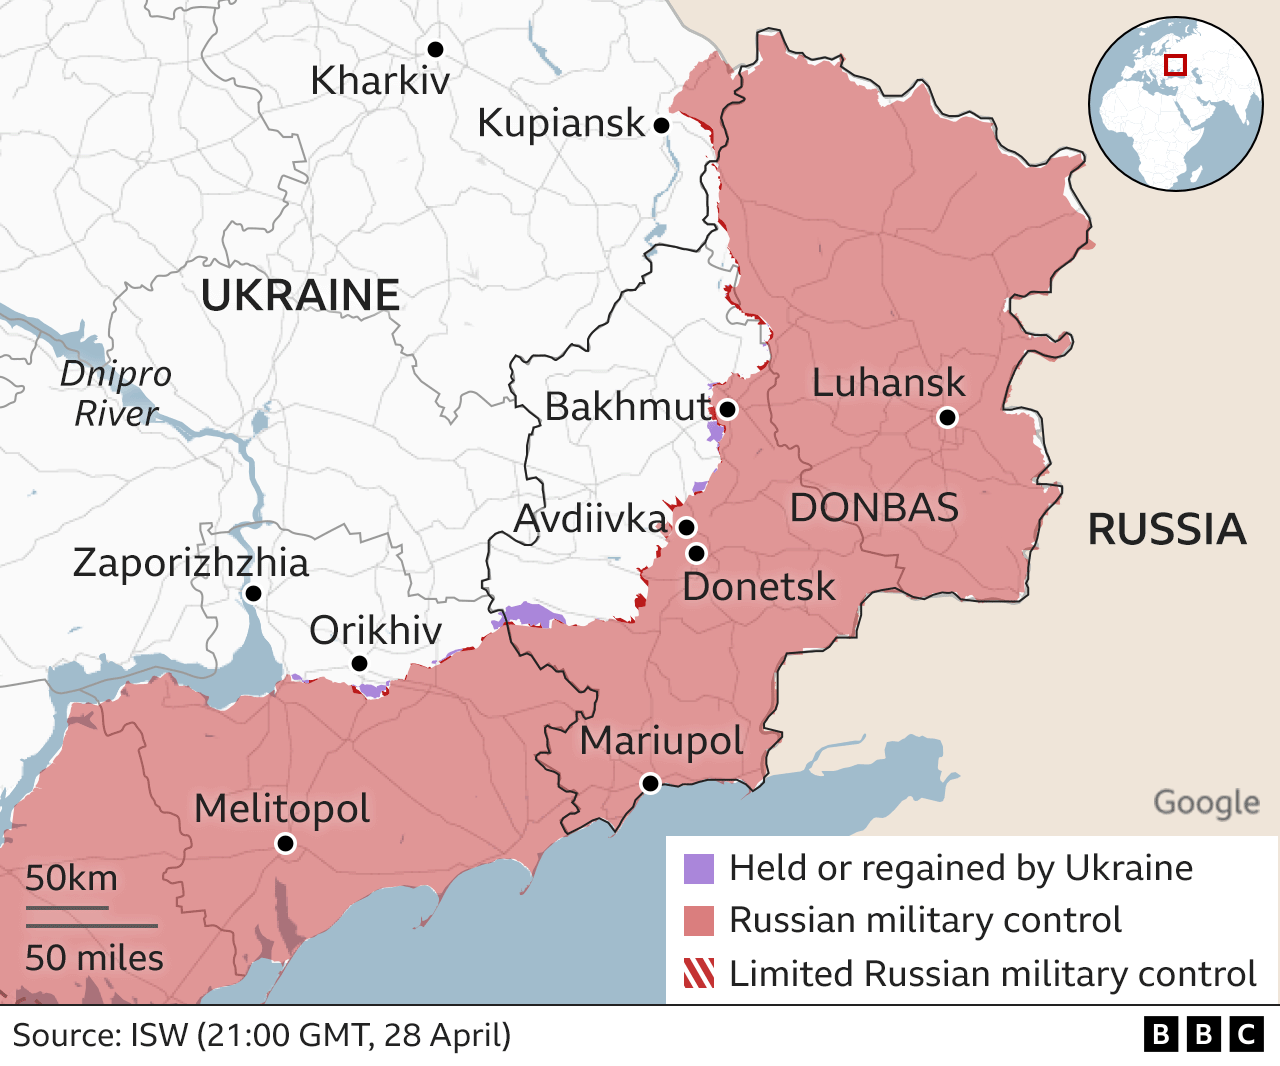 Map of eastern Ukraine showing which parts are under Russian military control